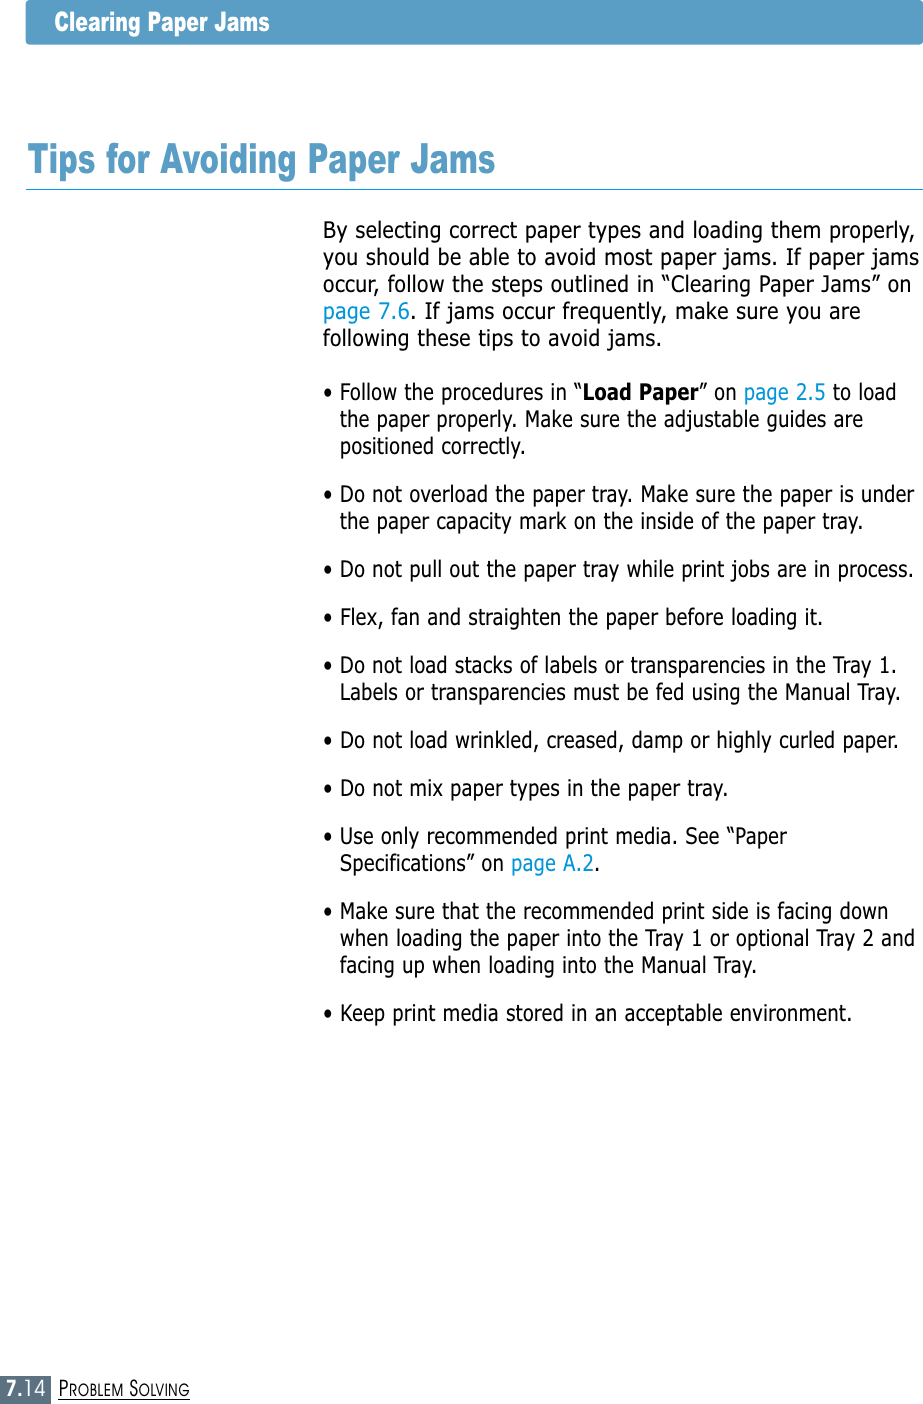 7.14PROBLEM SOLVINGClearing Paper JamsTips for Avoiding Paper JamsBy selecting correct paper types and loading them properly,you should be able to avoid most paper jams. If paper jamsoccur, follow the steps outlined in “Clearing Paper Jams” onpage 7.6. If jams occur frequently, make sure you arefollowing these tips to avoid jams.• Follow the procedures in “Load Paper” on page 2.5 to loadthe paper properly. Make sure the adjustable guides arepositioned correctly.• Do not overload the paper tray. Make sure the paper is underthe paper capacity mark on the inside of the paper tray.• Do not pull out the paper tray while print jobs are in process.• Flex, fan and straighten the paper before loading it. • Do not load stacks of labels or transparencies in the Tray 1.Labels or transparencies must be fed using the Manual Tray.• Do not load wrinkled, creased, damp or highly curled paper.• Do not mix paper types in the paper tray.• Use only recommended print media. See “PaperSpecifications” on page A.2.• Make sure that the recommended print side is facing downwhen loading the paper into the Tray 1 or optional Tray 2 andfacing up when loading into the Manual Tray.• Keep print media stored in an acceptable environment.